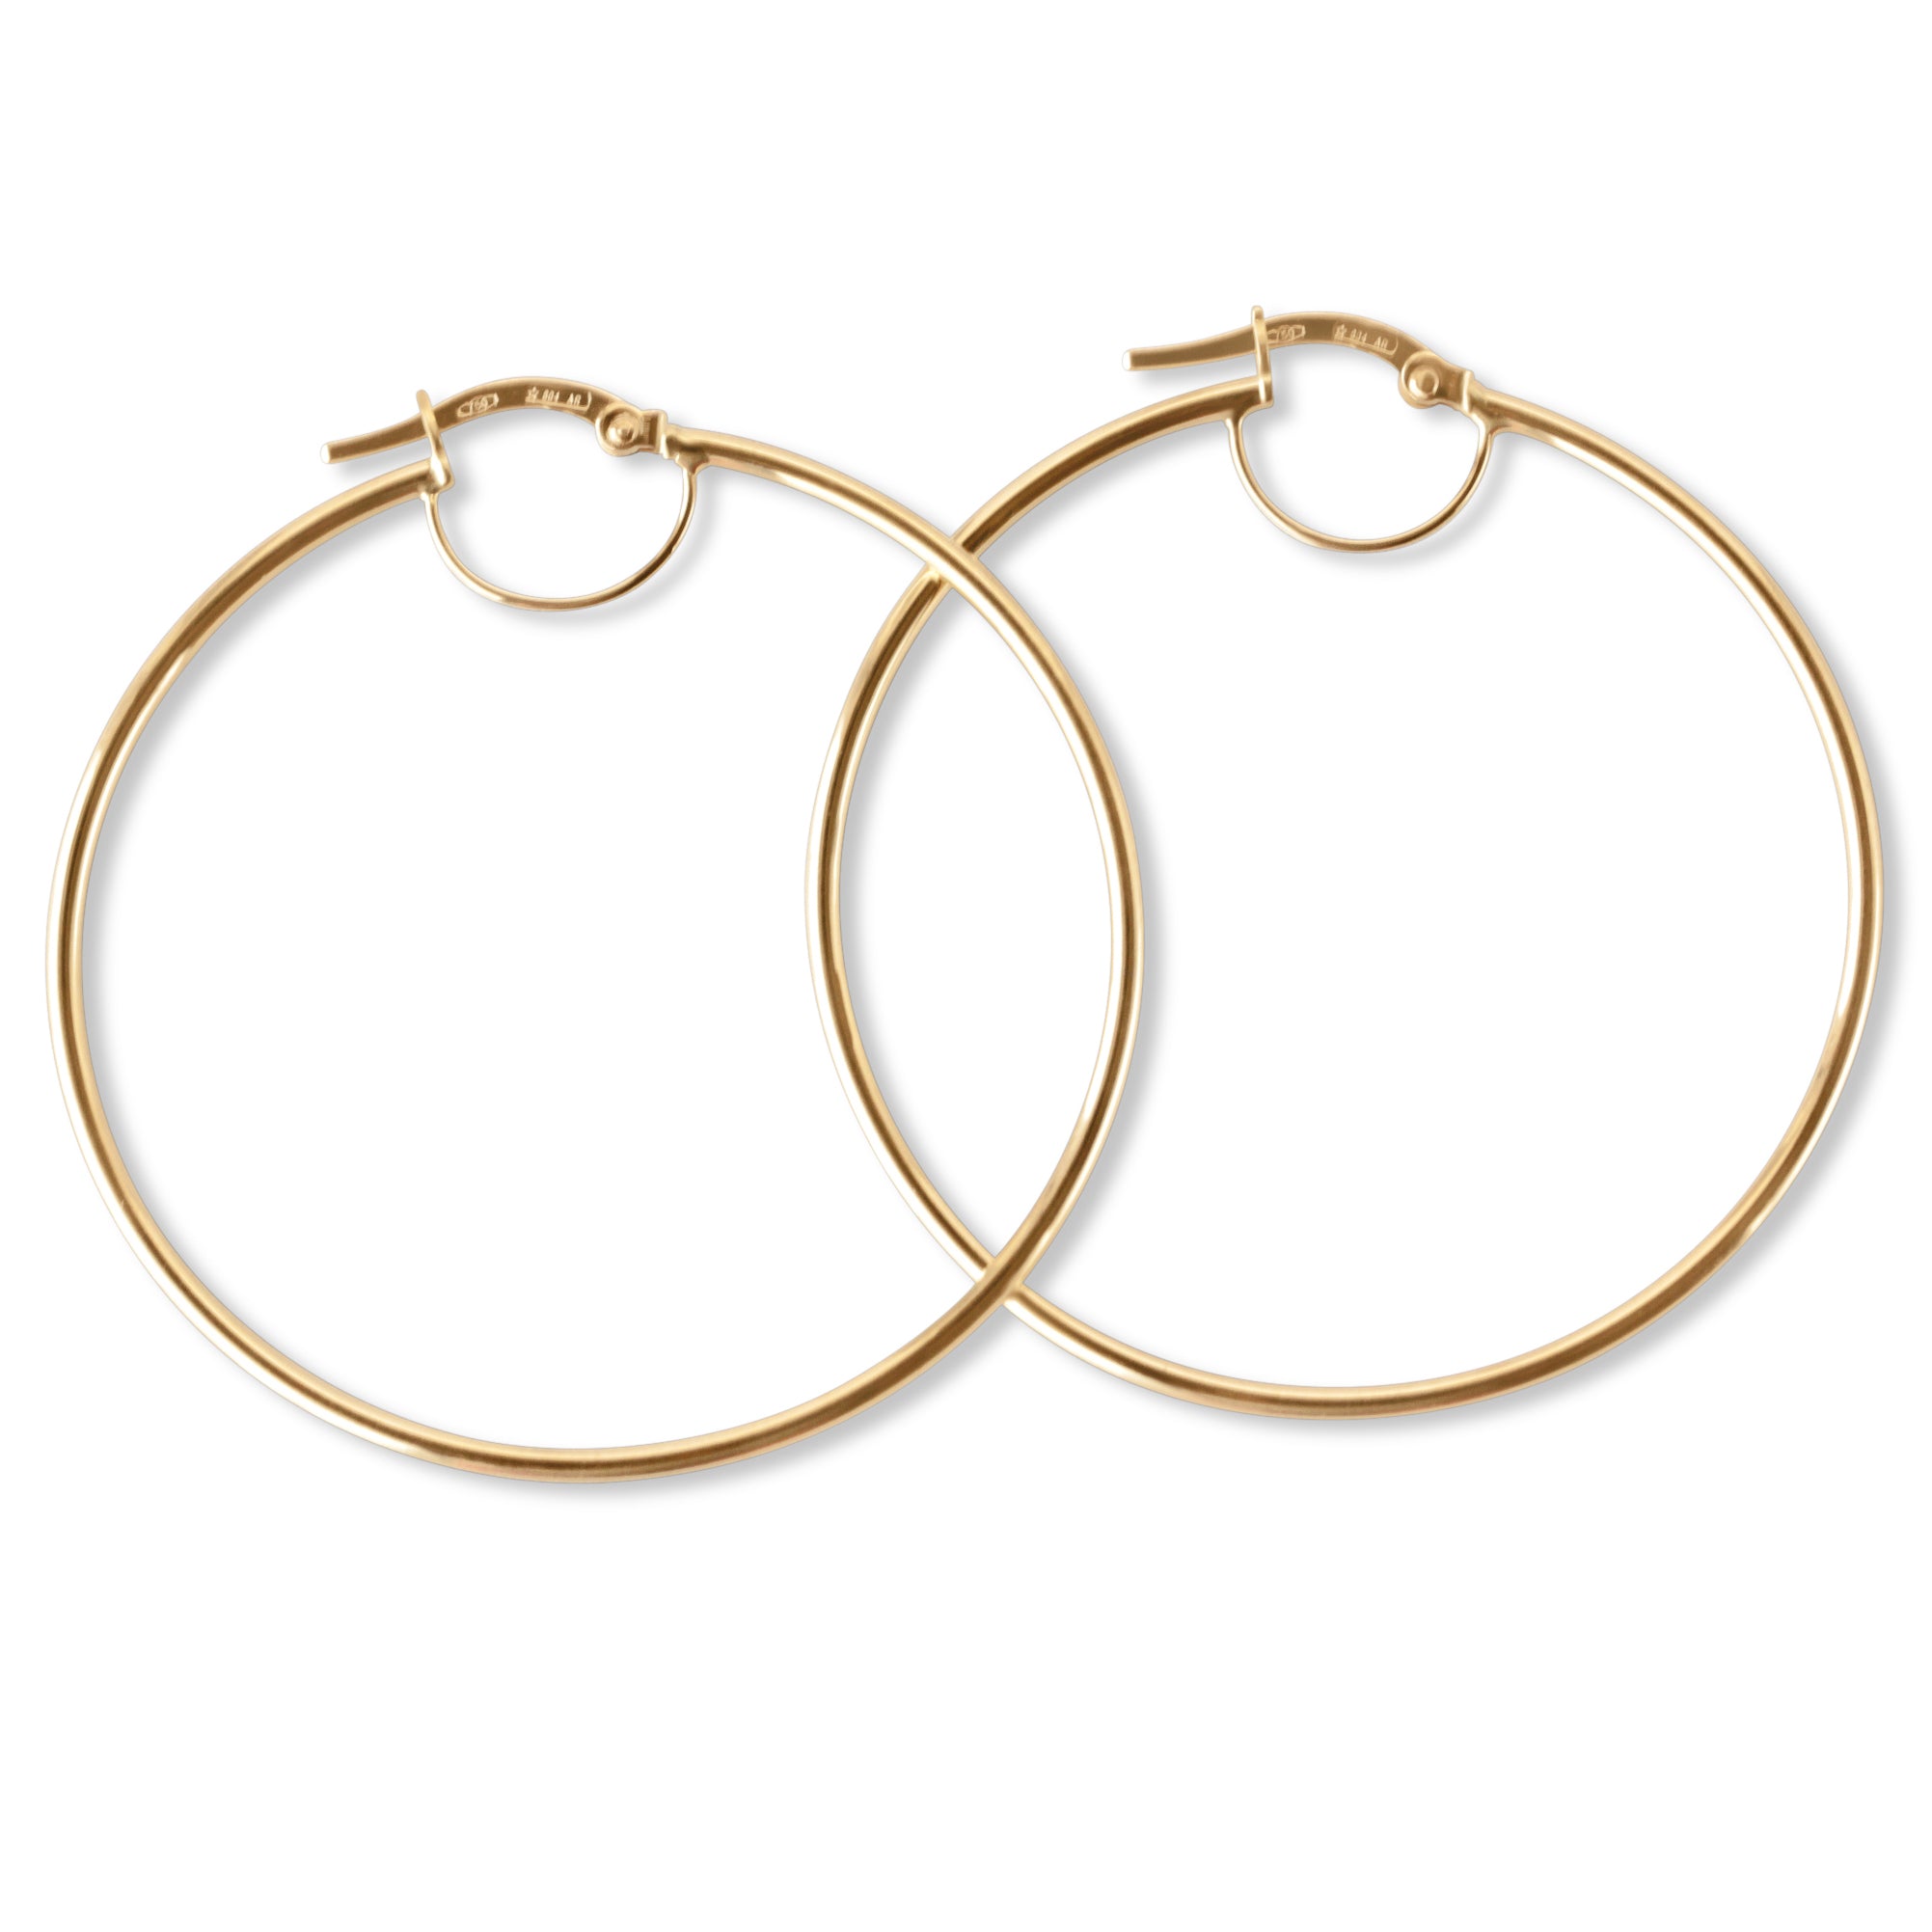 oversized gold hoops earrings face angle